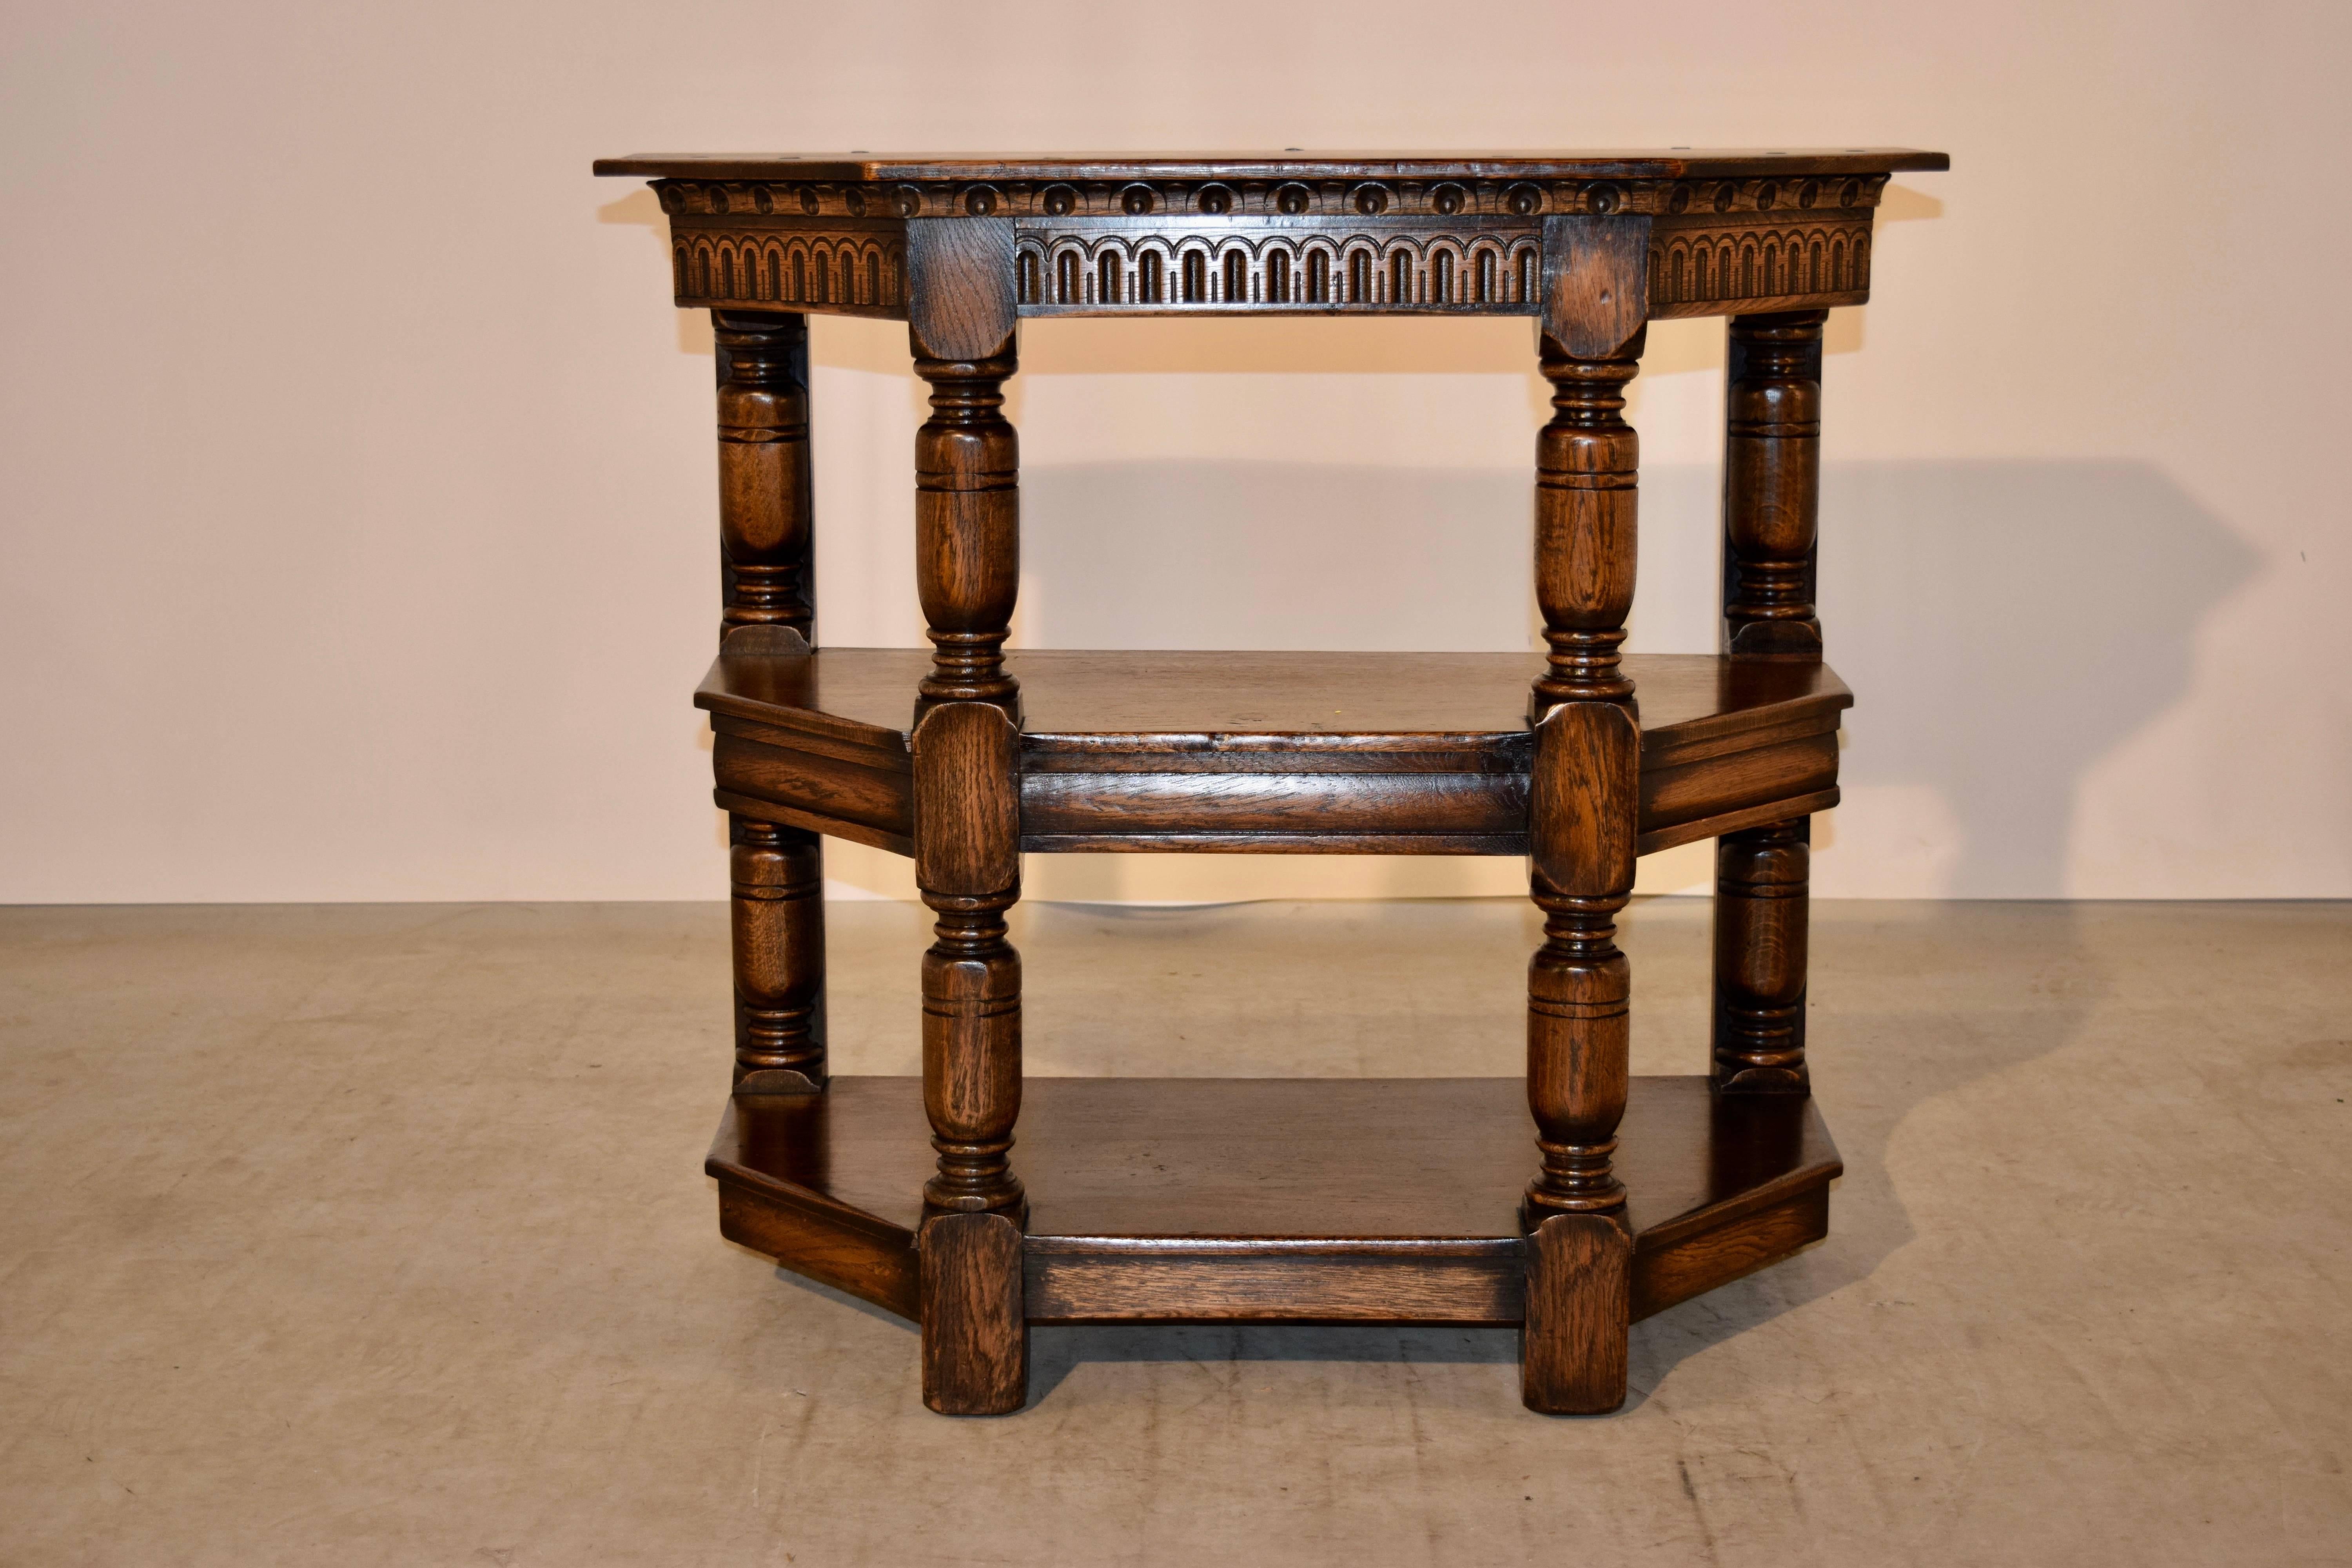 19th century English shelf made of oak. The top is shaped and has pegged construction, following down to a base with hand-carved decorated molding and apron over two shelves joined by hand-turned legs in the front and simple legs in the back for